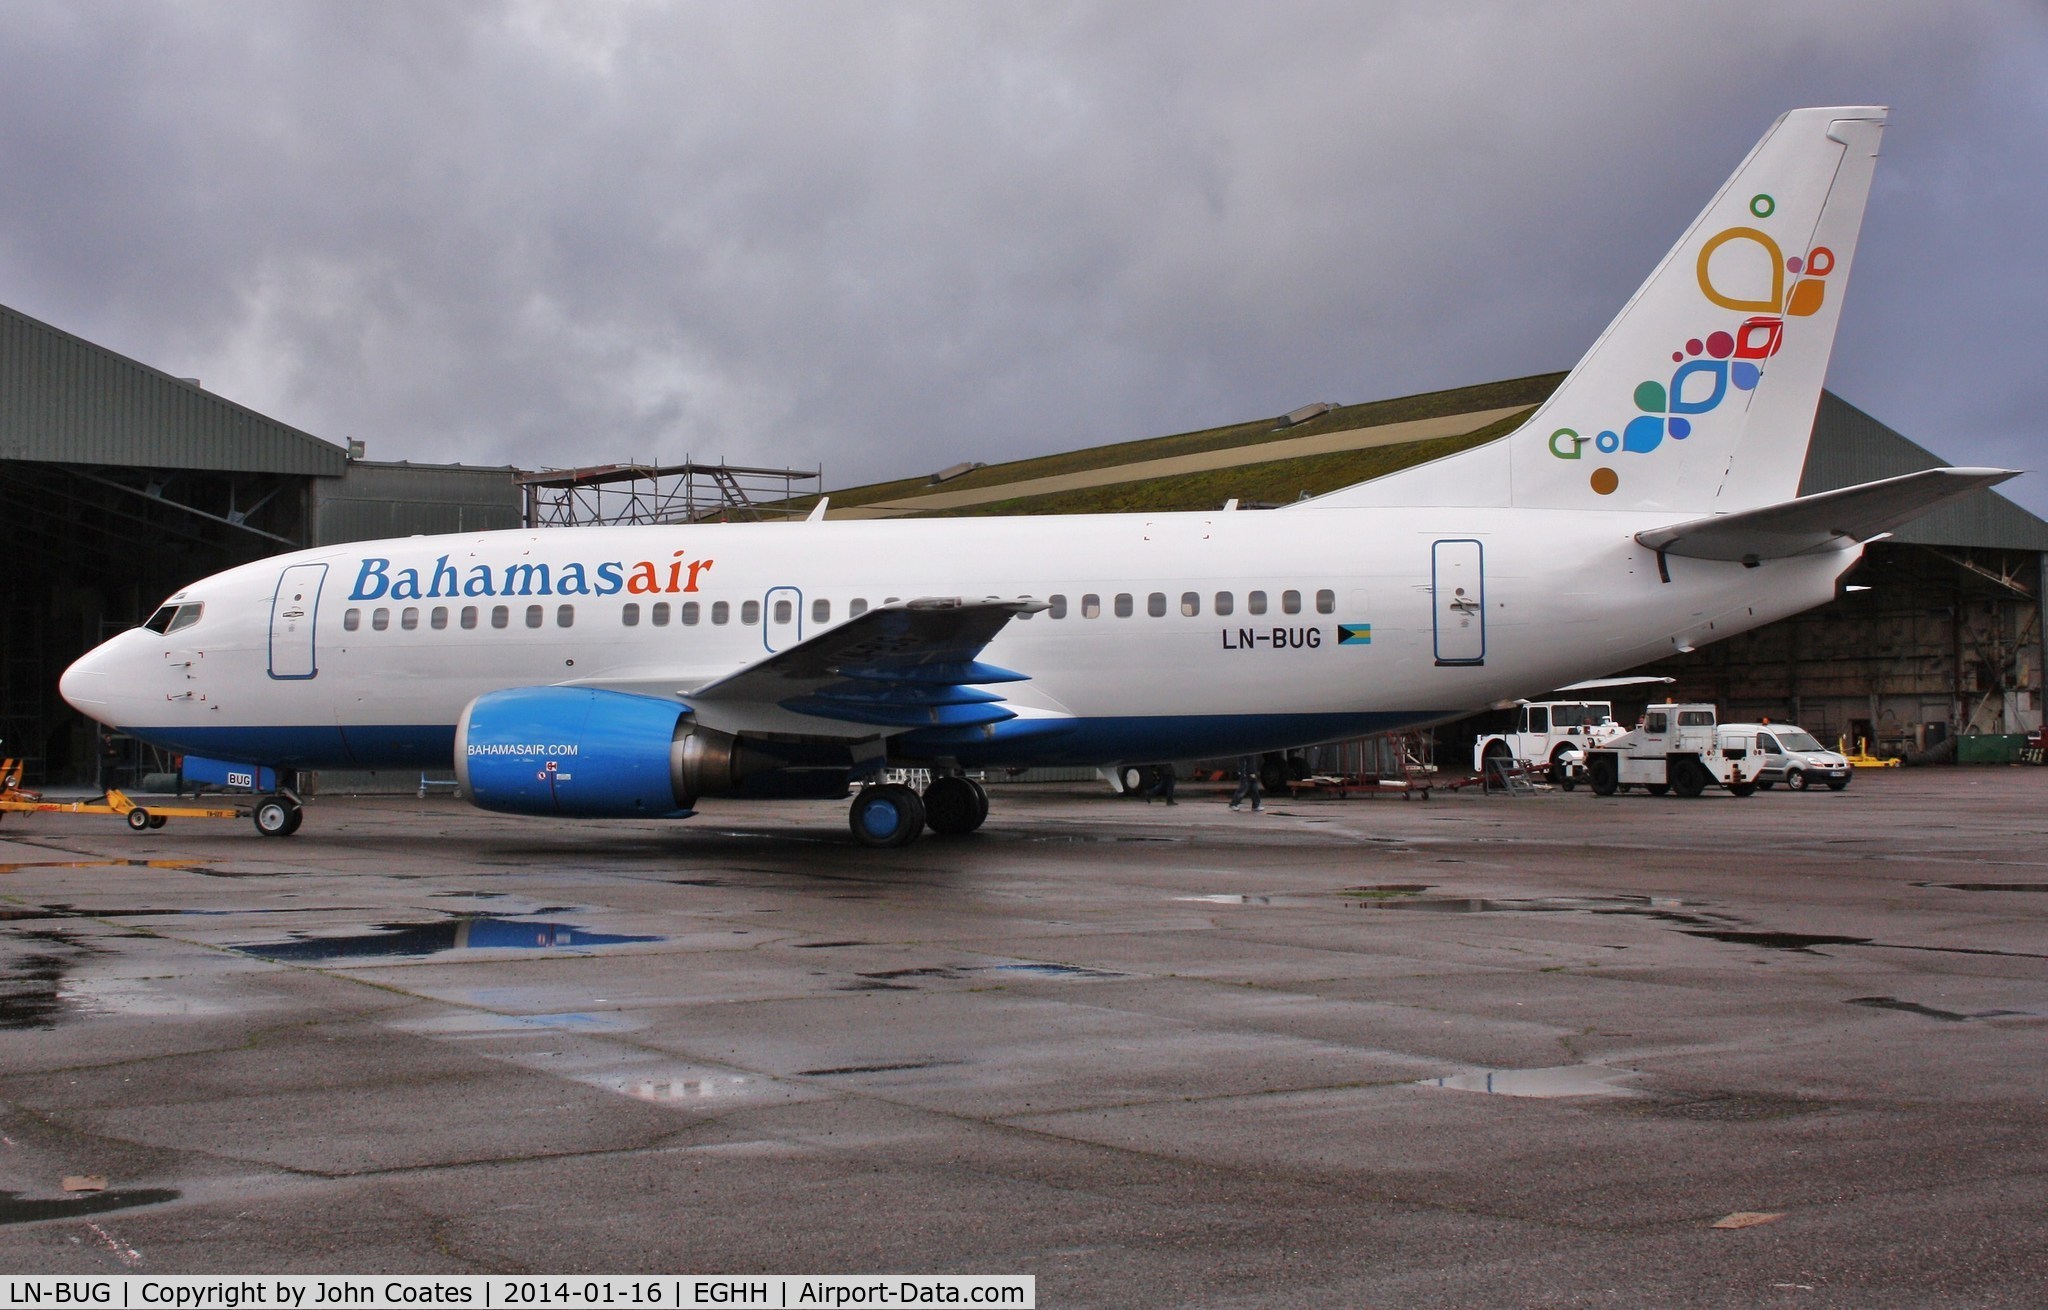 LN-BUG, 1997 Boeing 737-505 C/N 27631, Just repainted to Bahamasair livery. Reported going C6-BFC